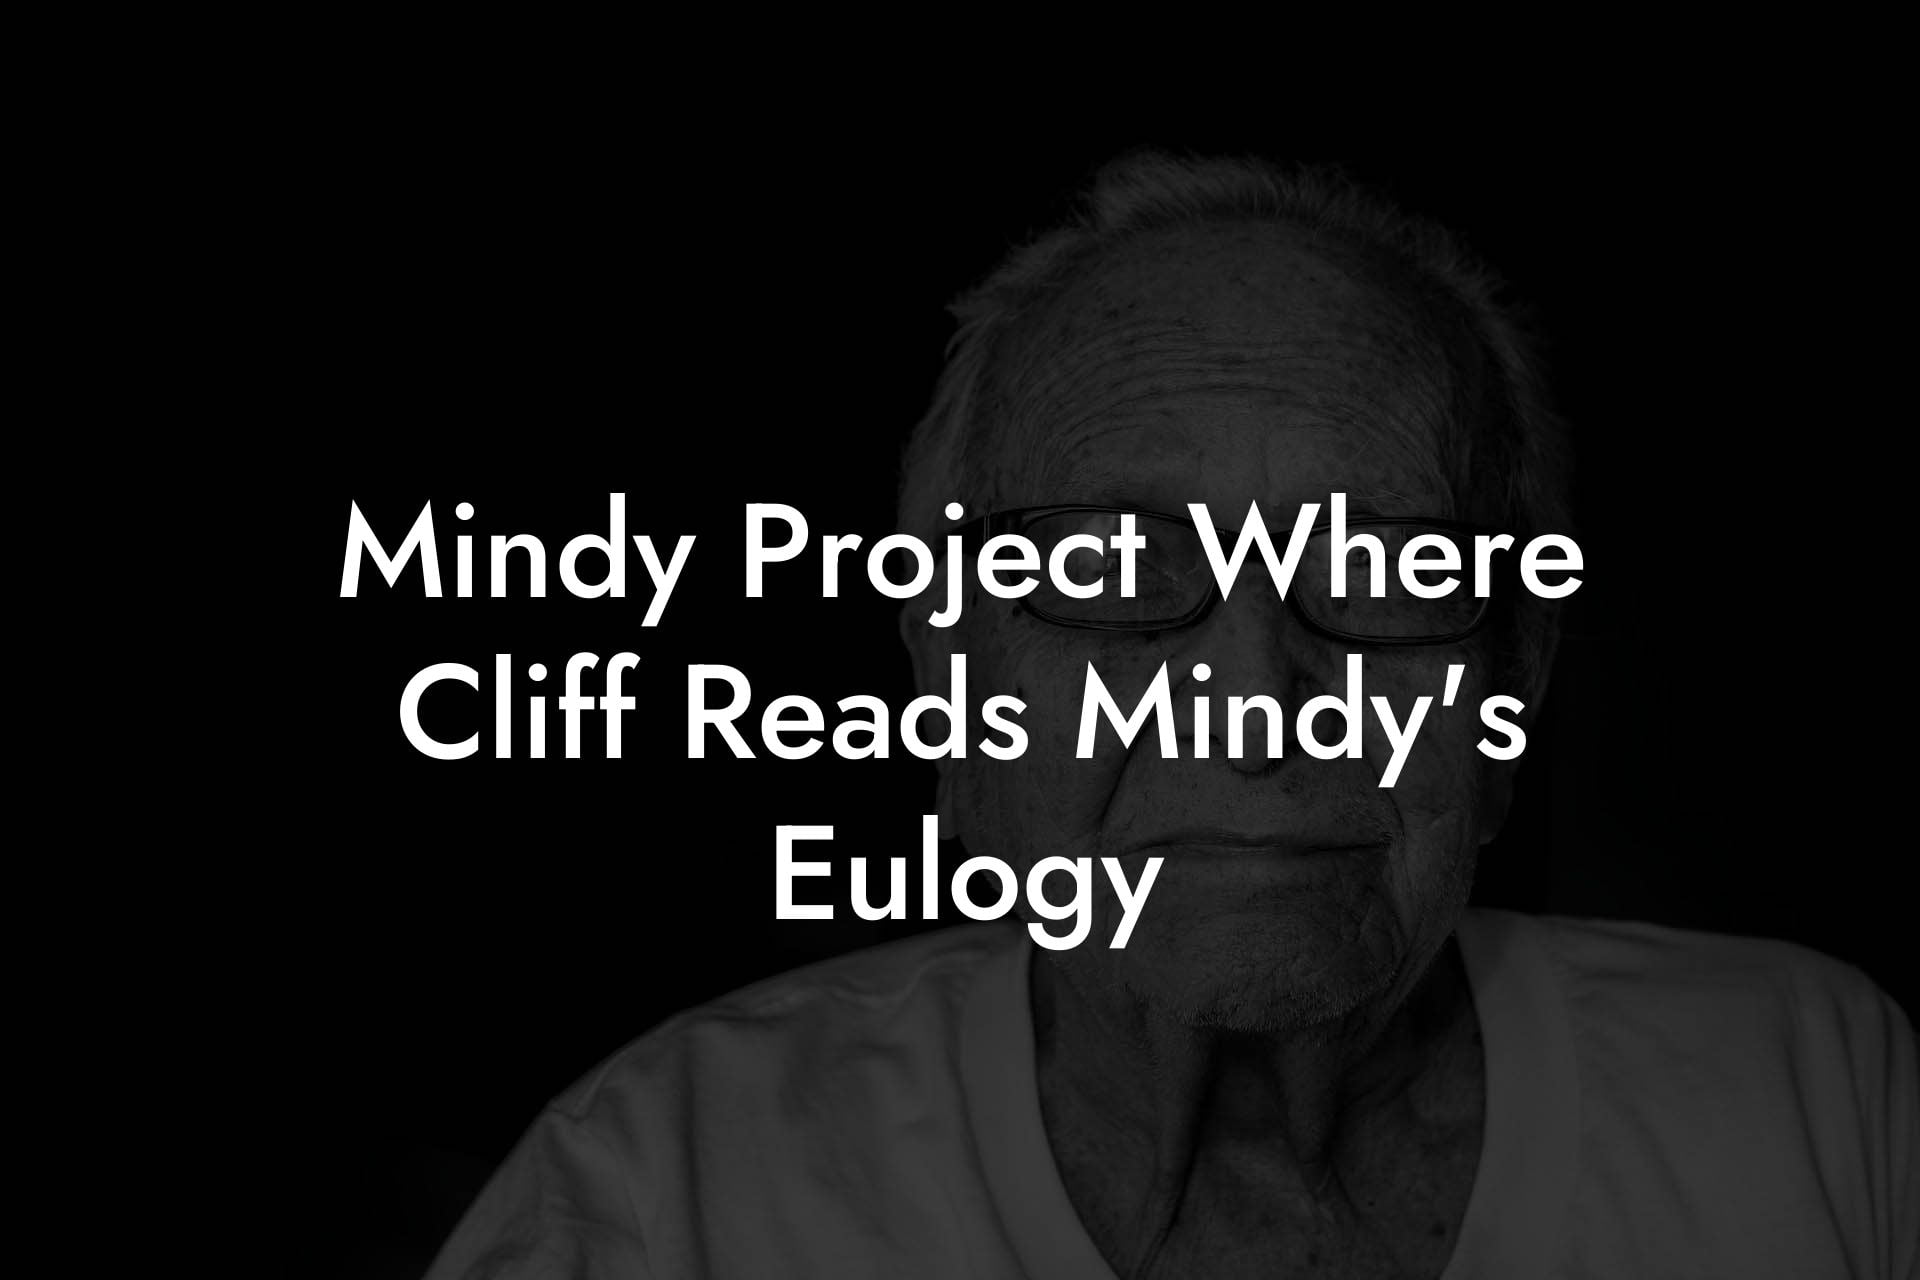 Mindy Project Where Cliff Reads Mindy's Eulogy